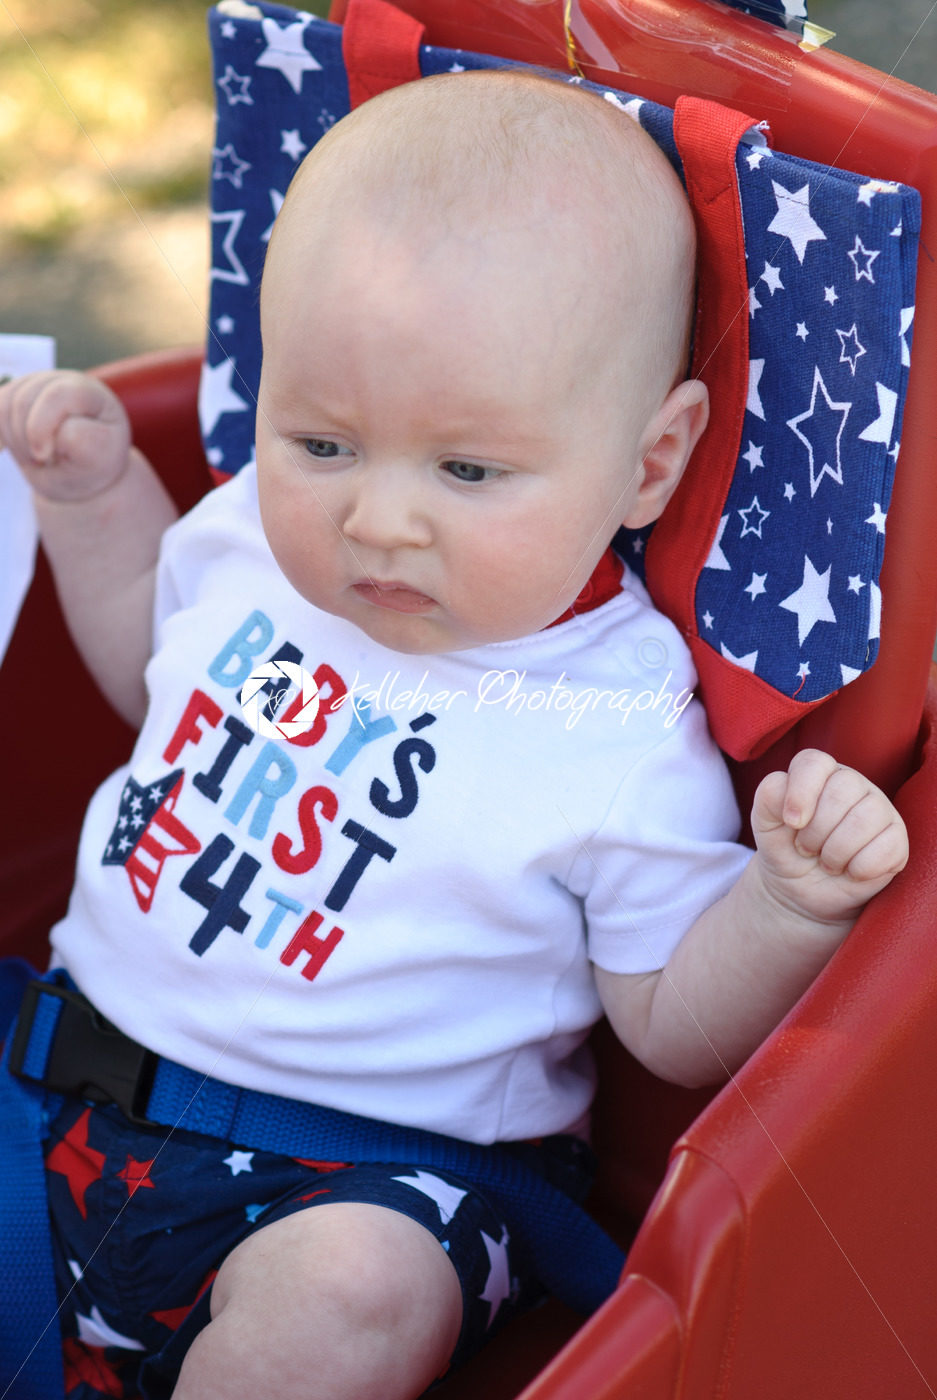 Young infant boy riding in red wagon having fun in the park for July Fourth - Kelleher Photography Store